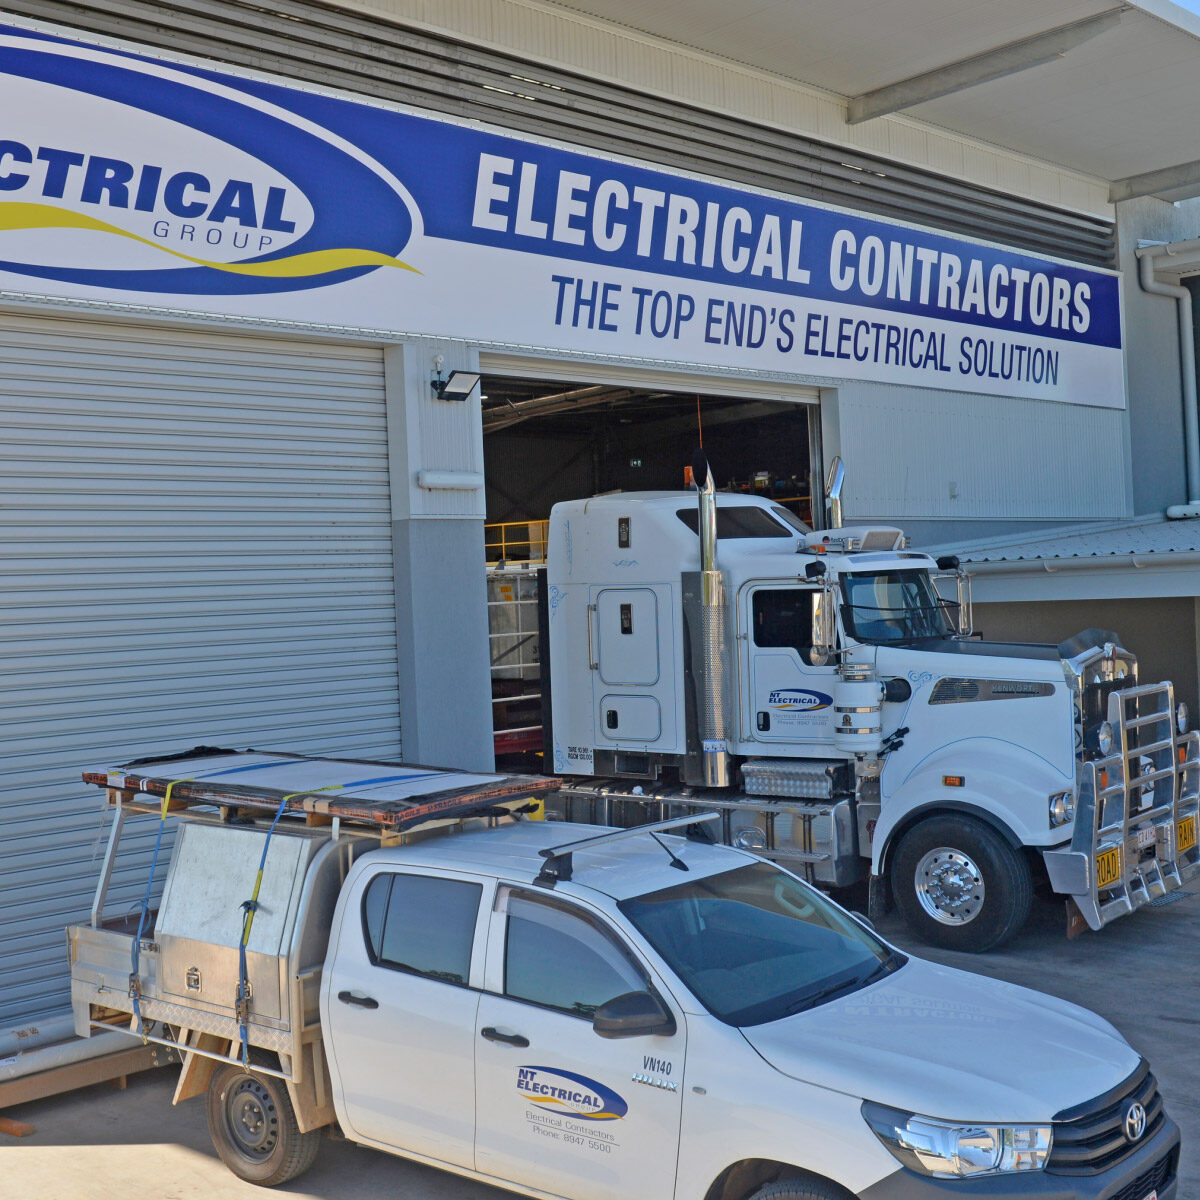 Our electrician shop in Darwin